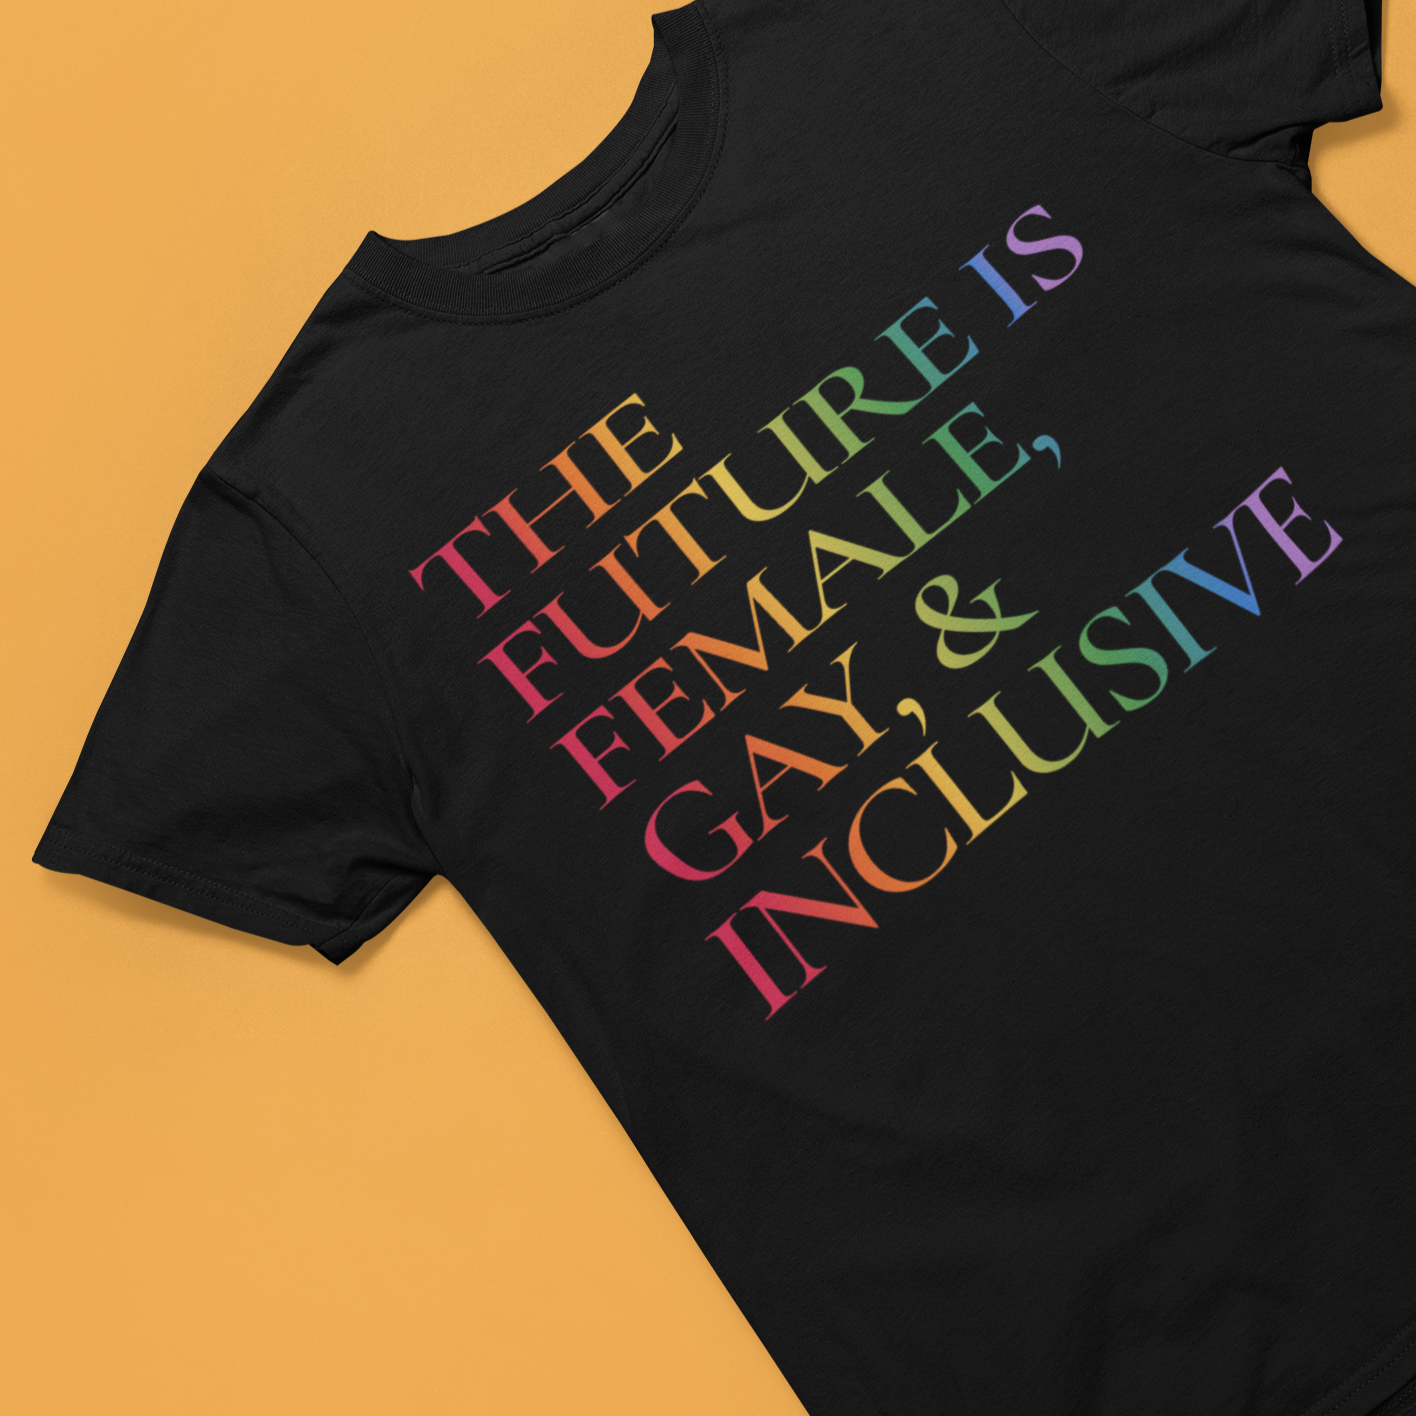 The Future is Female Gay and Inclusive T-Shirt